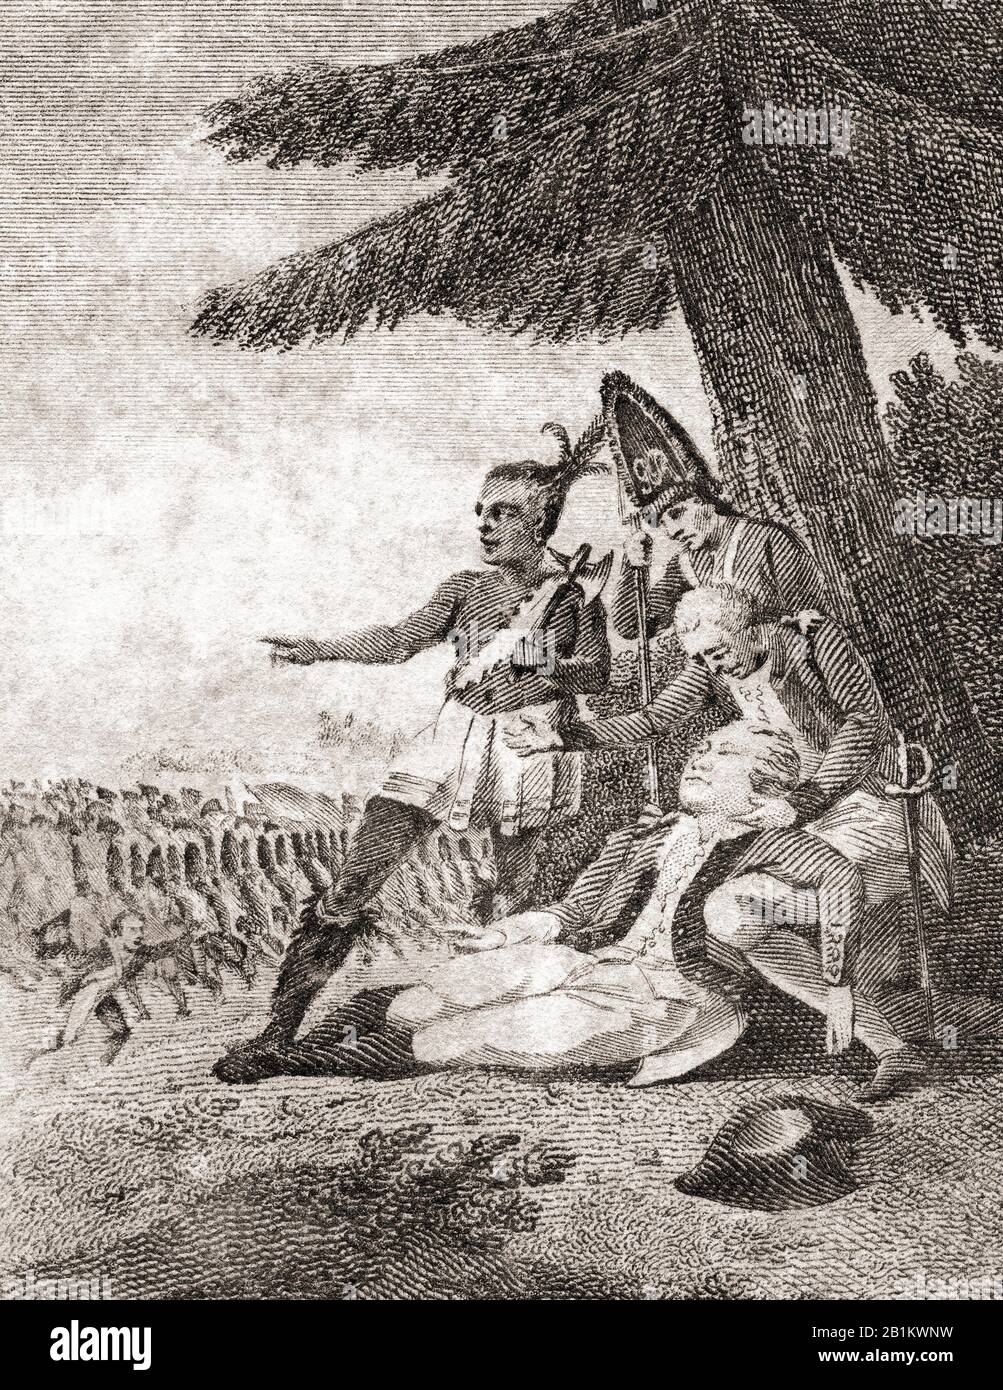 The death of Wolfe.  James Wolfe, 1727 –1759. British Army officer fatally wounded at the Battle of the Plains of Abraham.  From The History of England, from the earliest records to the year 1802, published 1812. Stock Photo